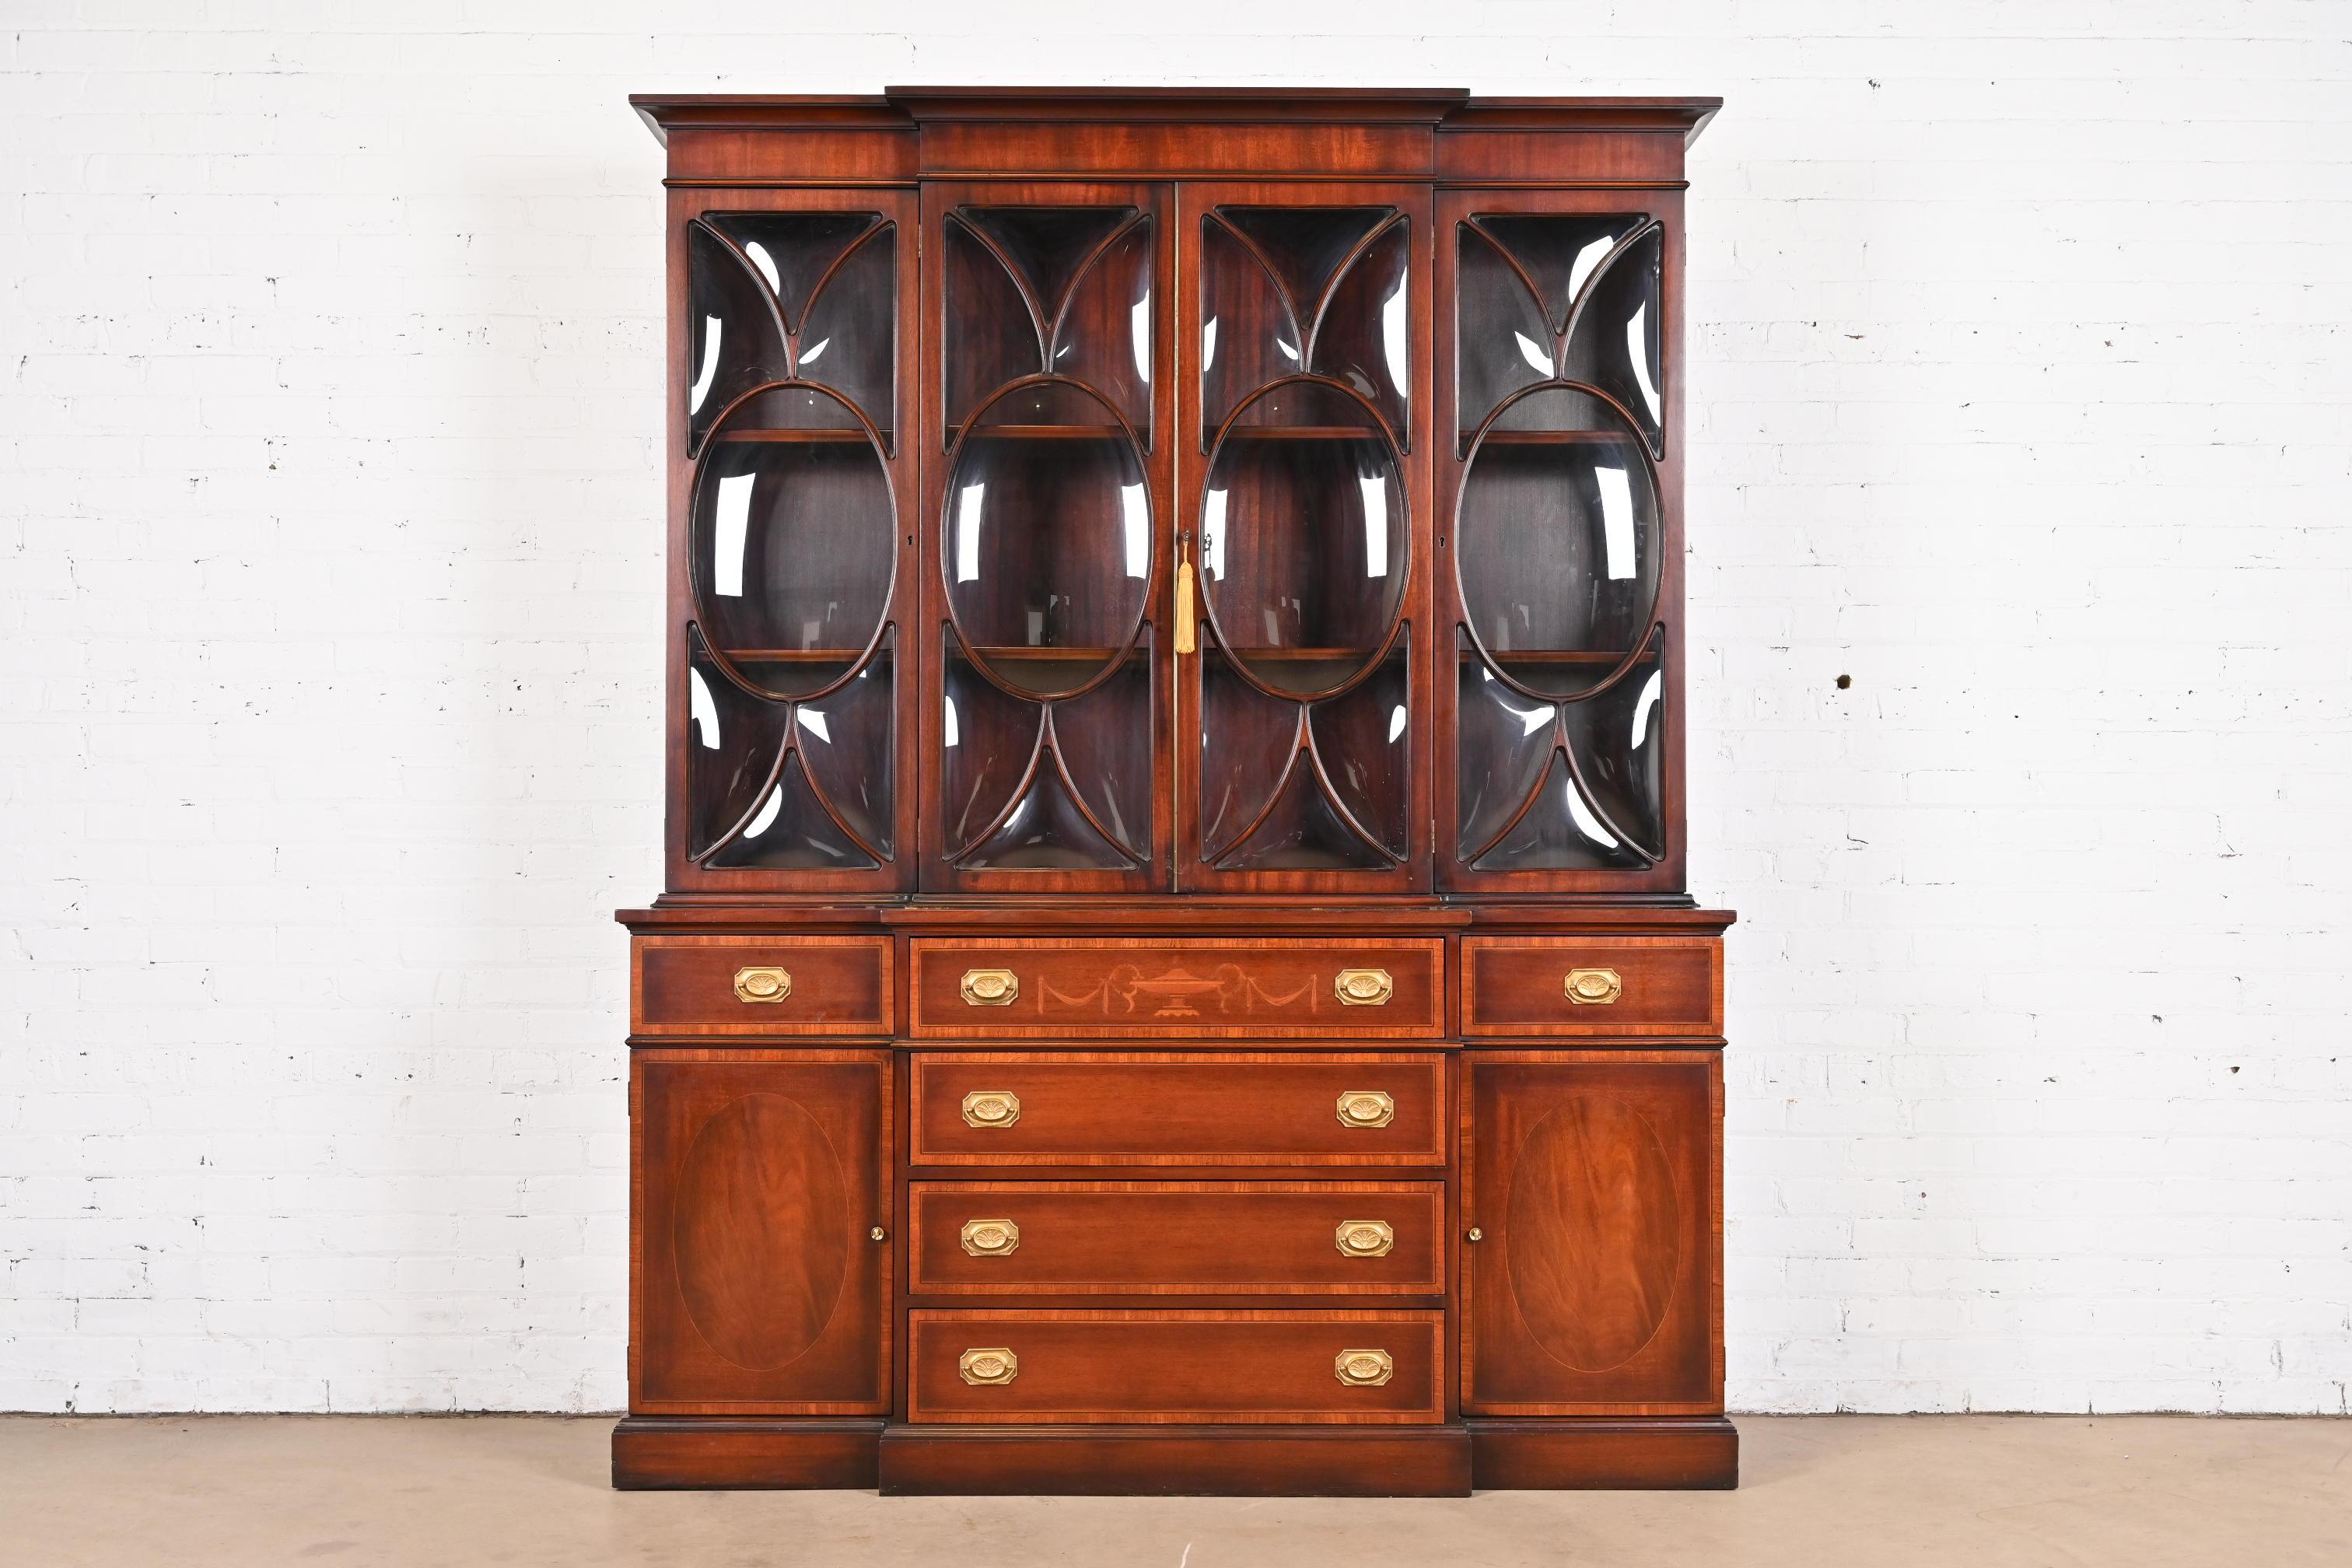 A gorgeous Georgian or Sheraton style breakfront bookcase or dining cabinet with drop front secretary desk

In the manner of Baker Furniture

USA, Circa Mid-20th Century

Mahogany, with inlaid satinwood banding and marquetry, mullioned bubble glass